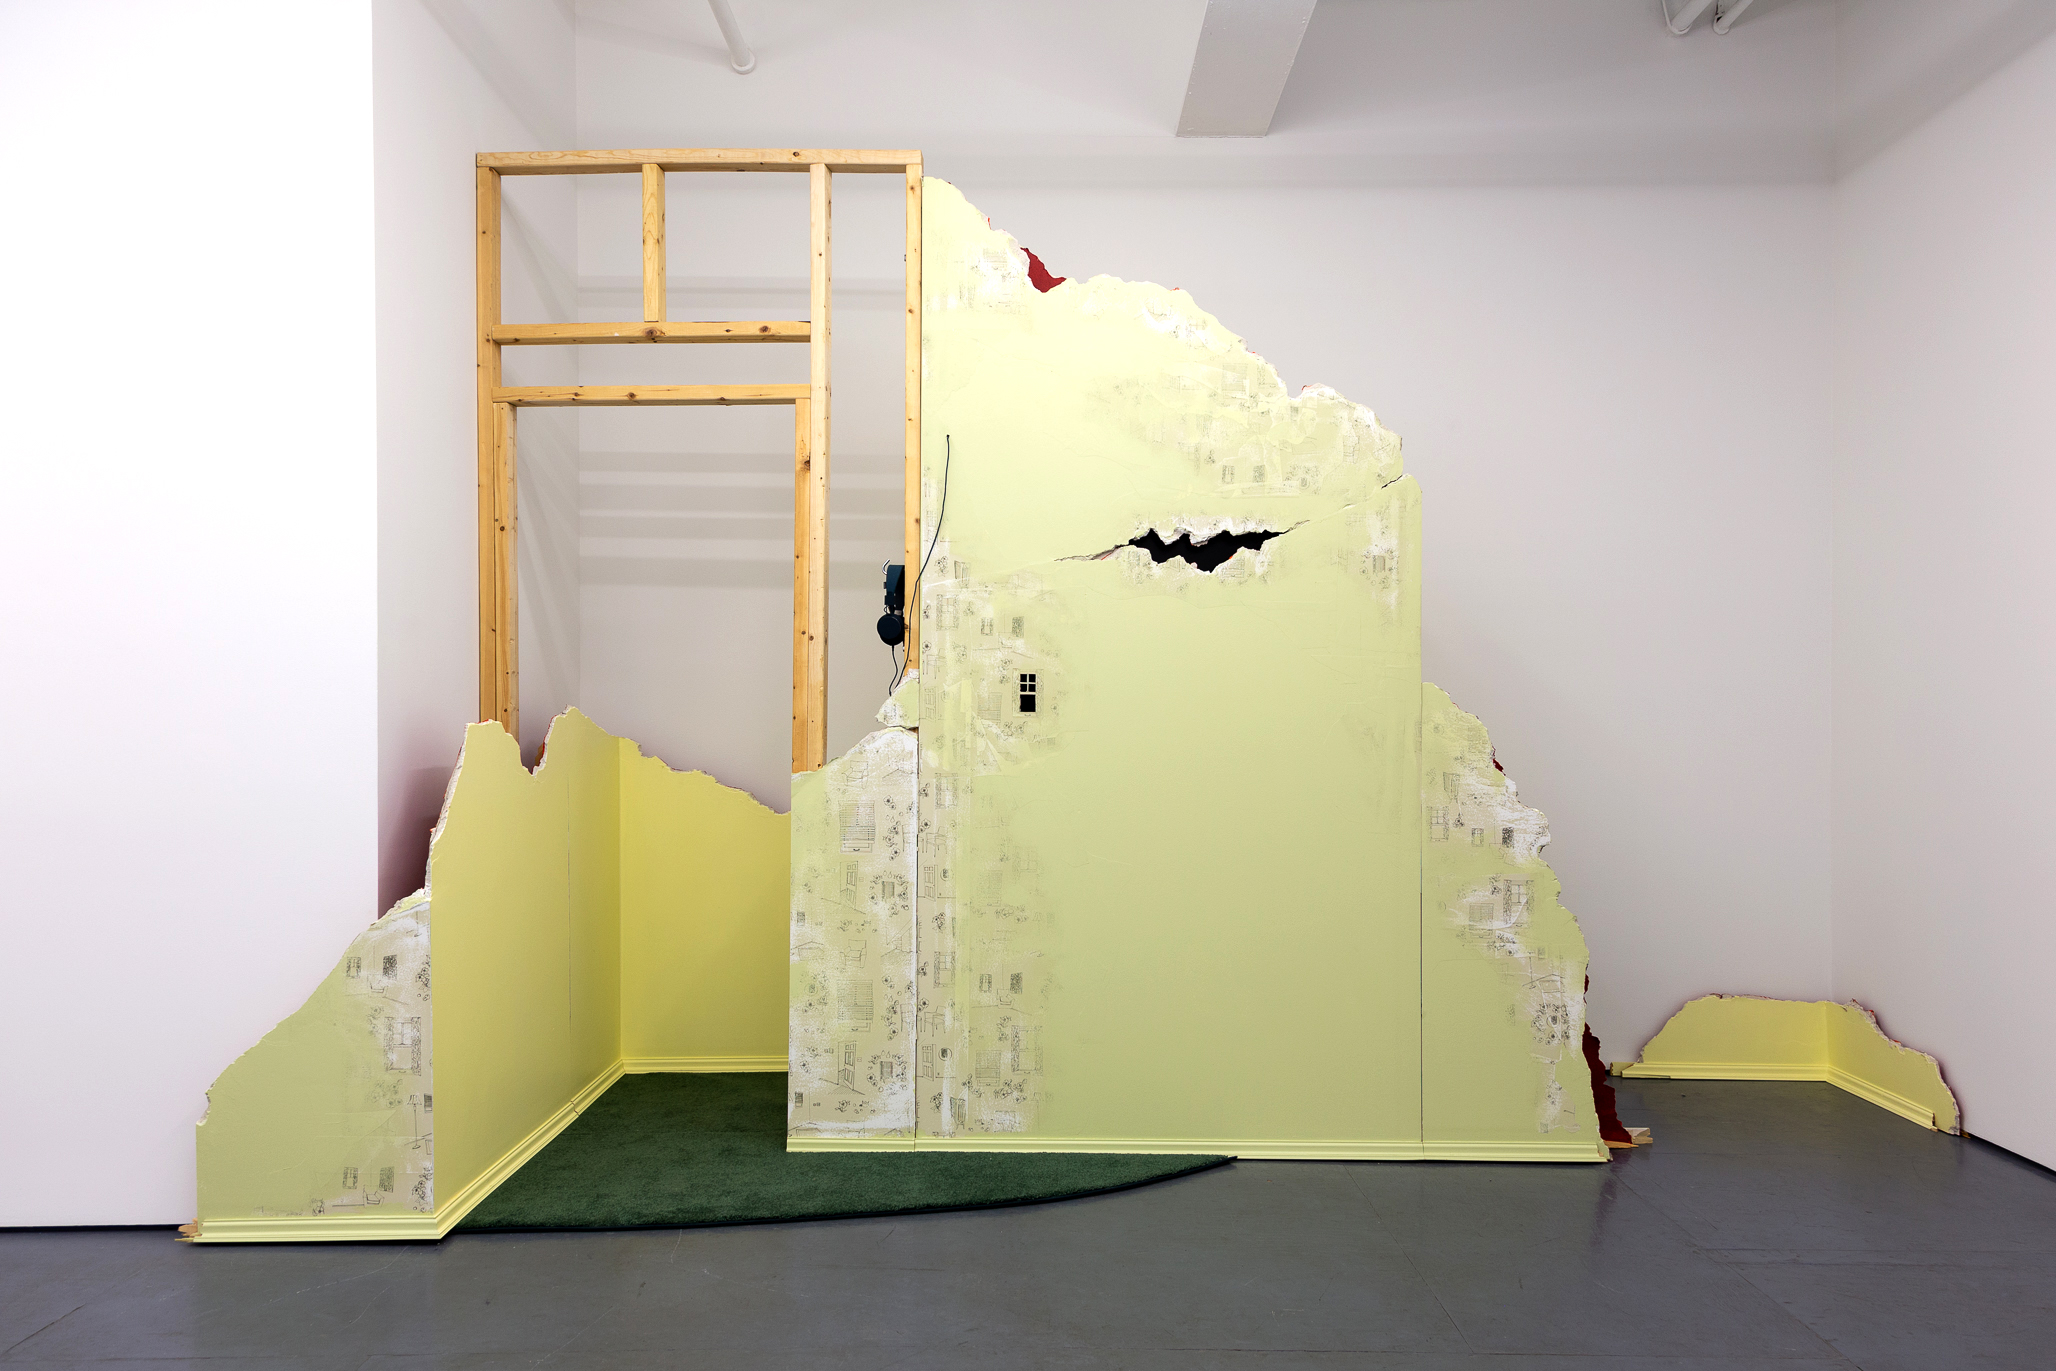  Installation view of Inside Out at Transmitter 